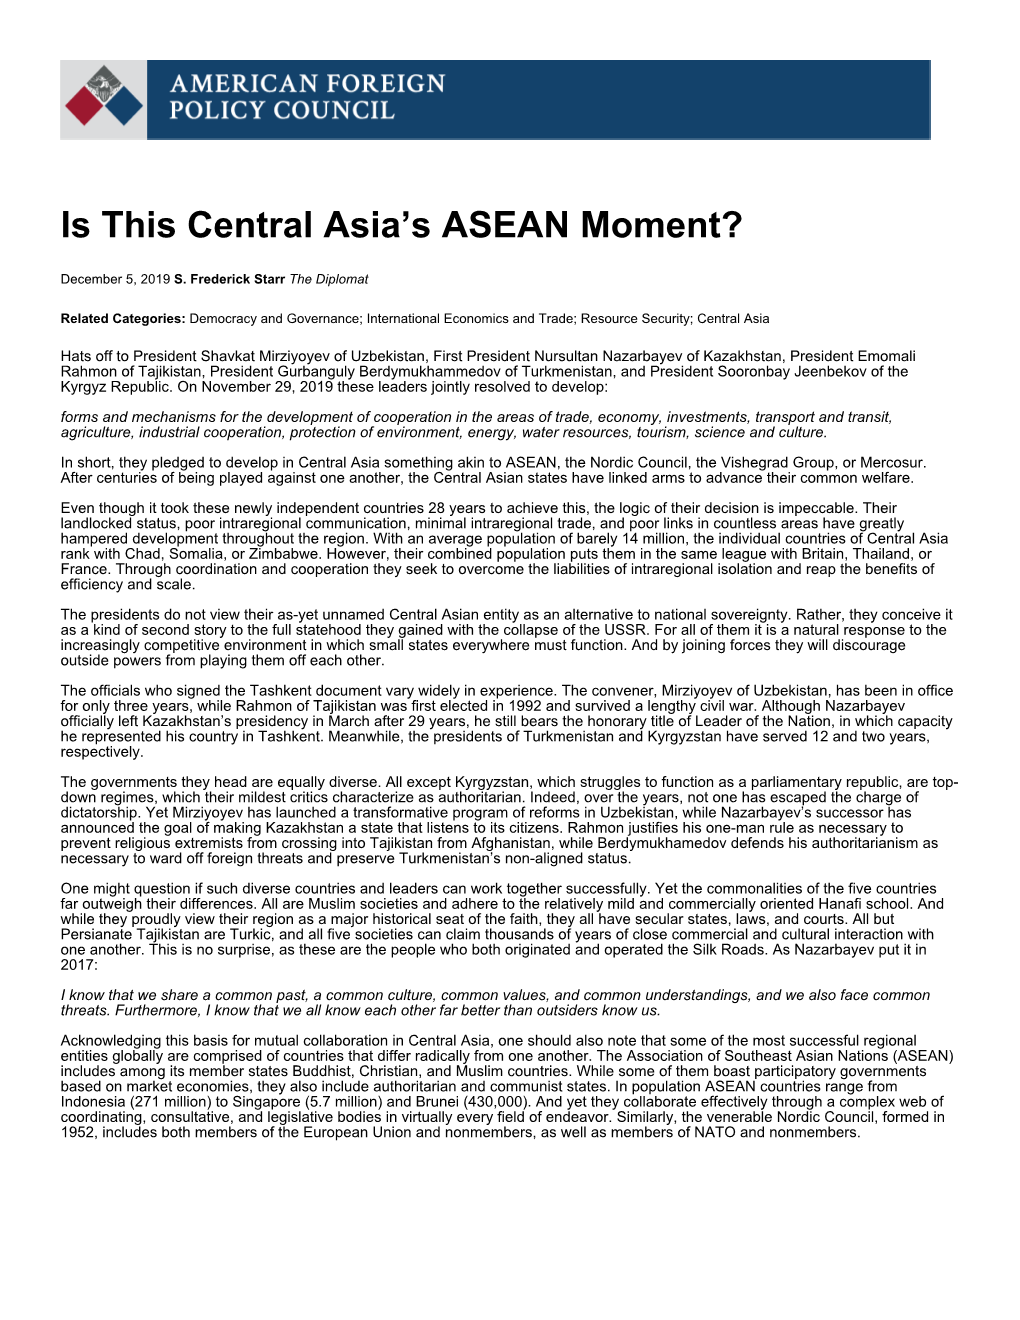 Is This Central Asia's ASEAN Moment? | American Foreign Policy Council